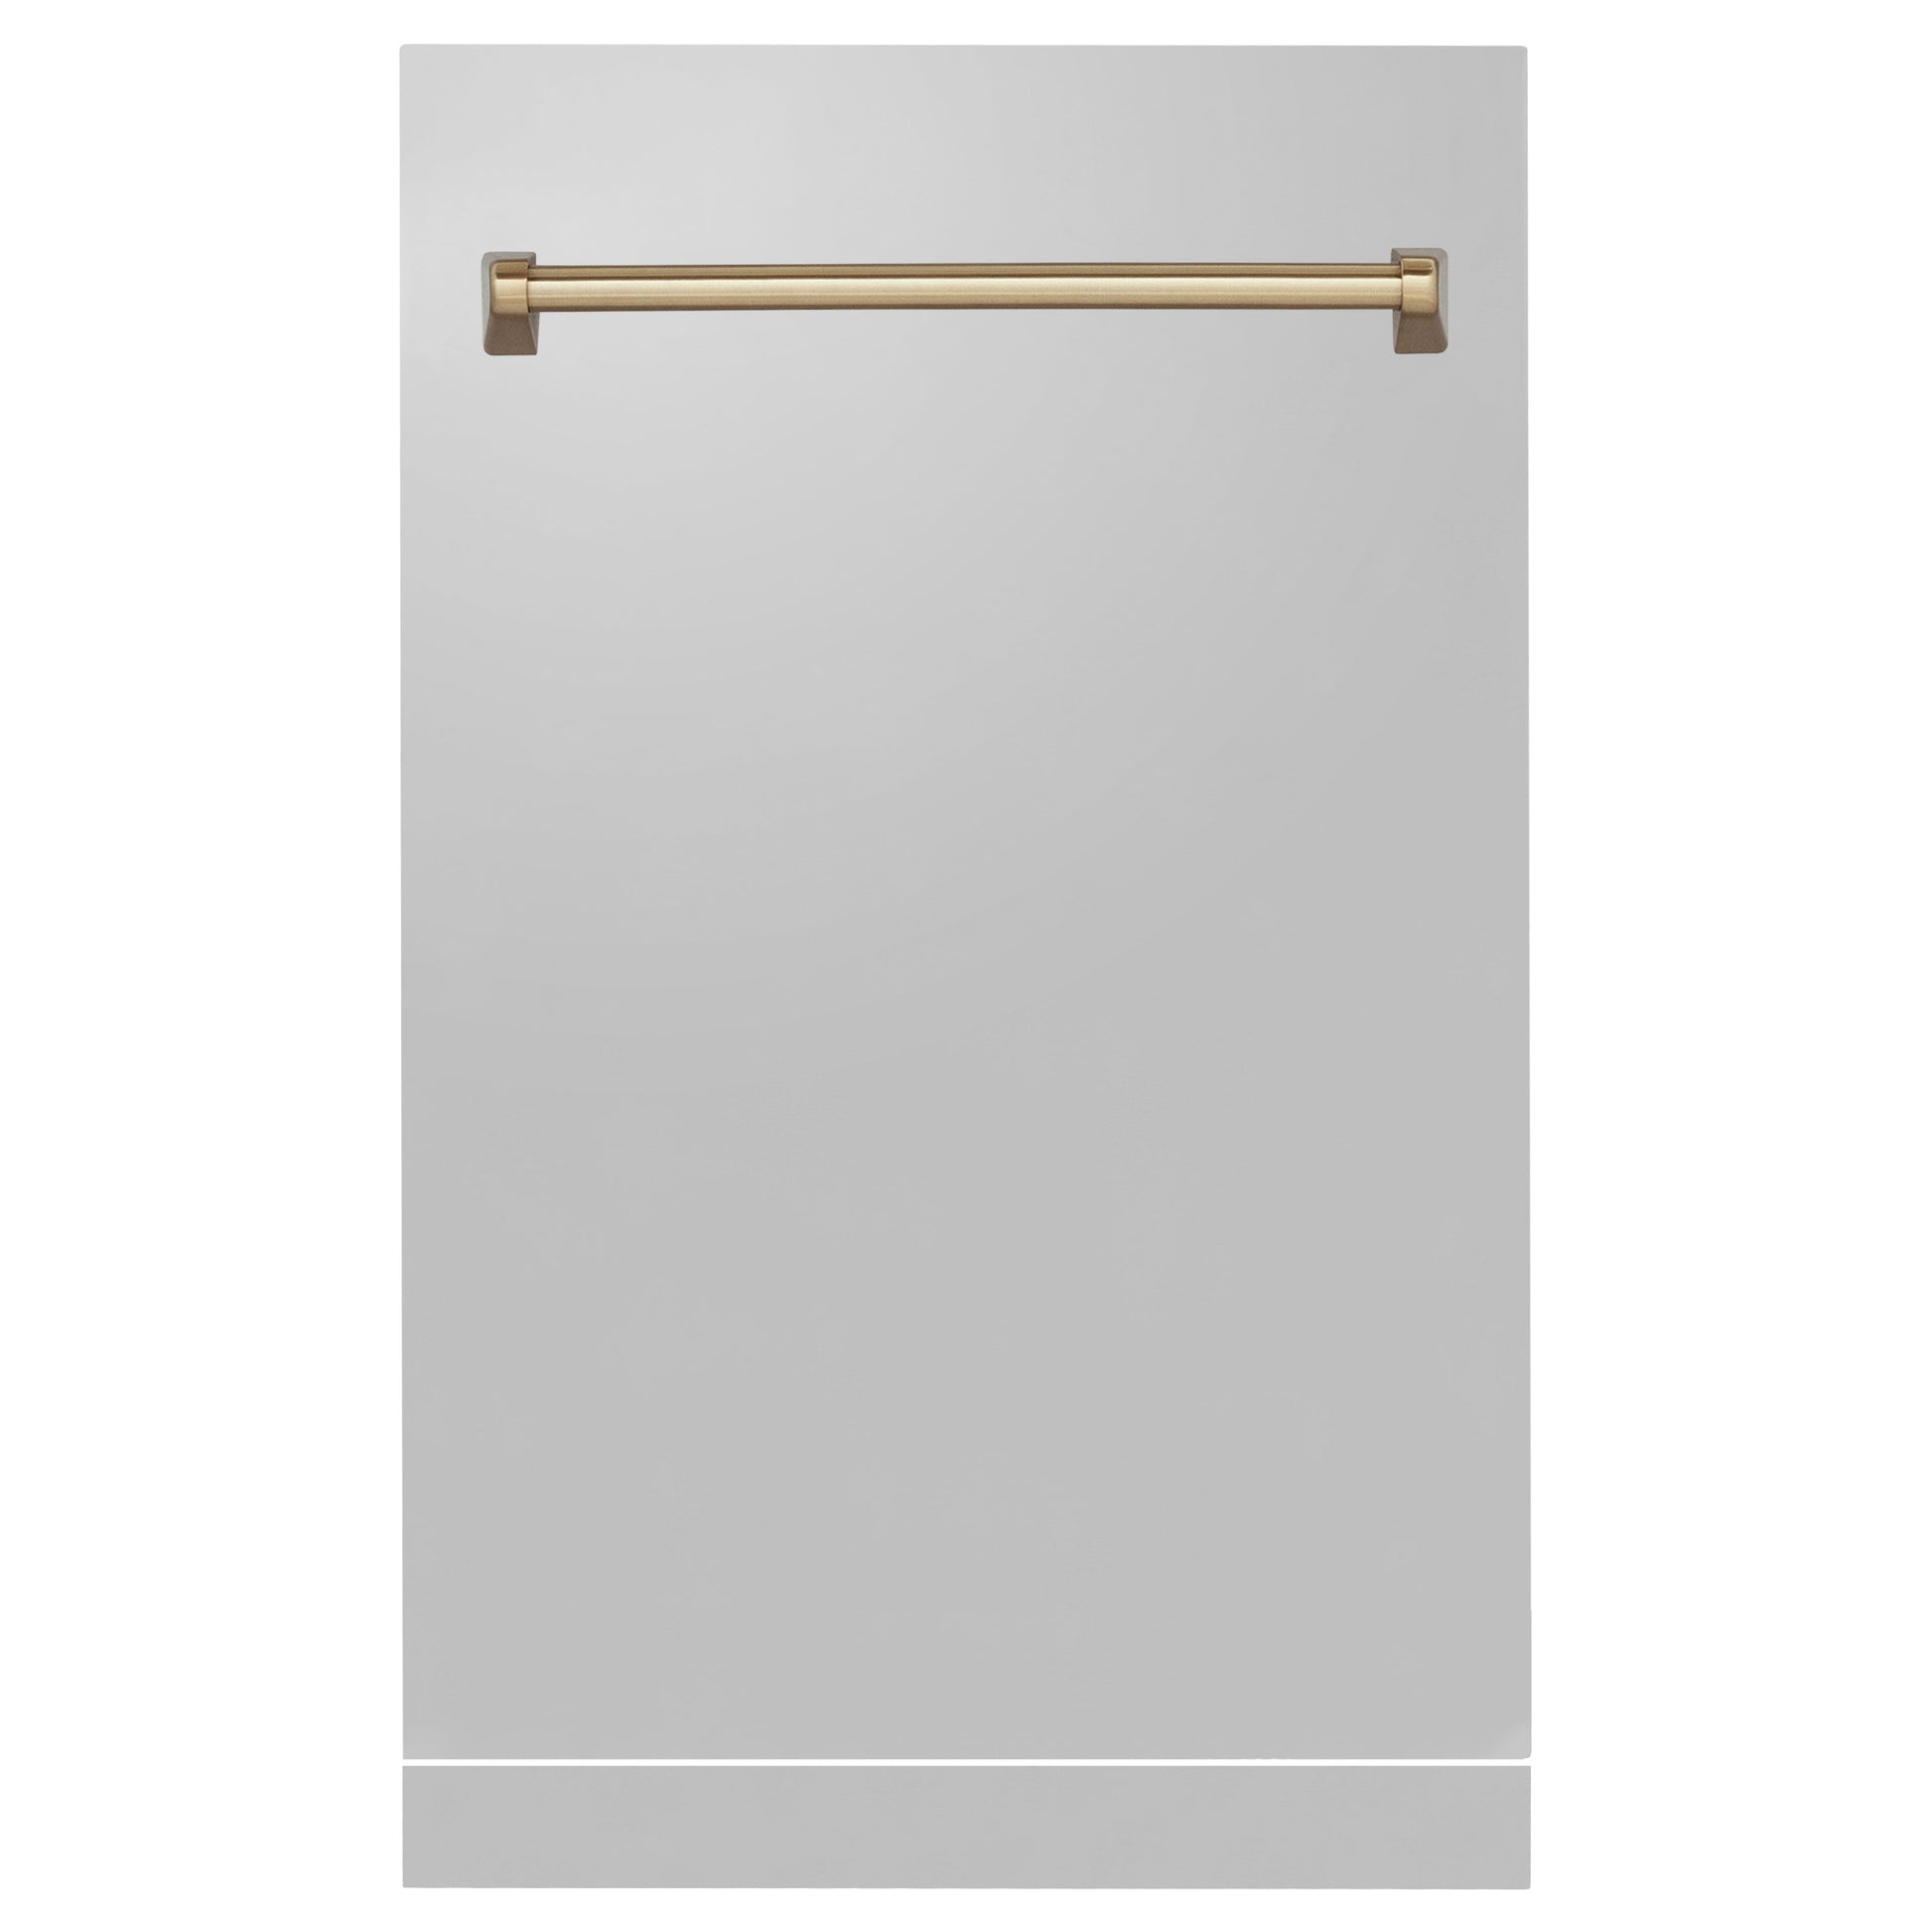 ZLINE 18" Autograph Edition Tallac Dishwasher Panel - Stainless Steel with Accent Handle